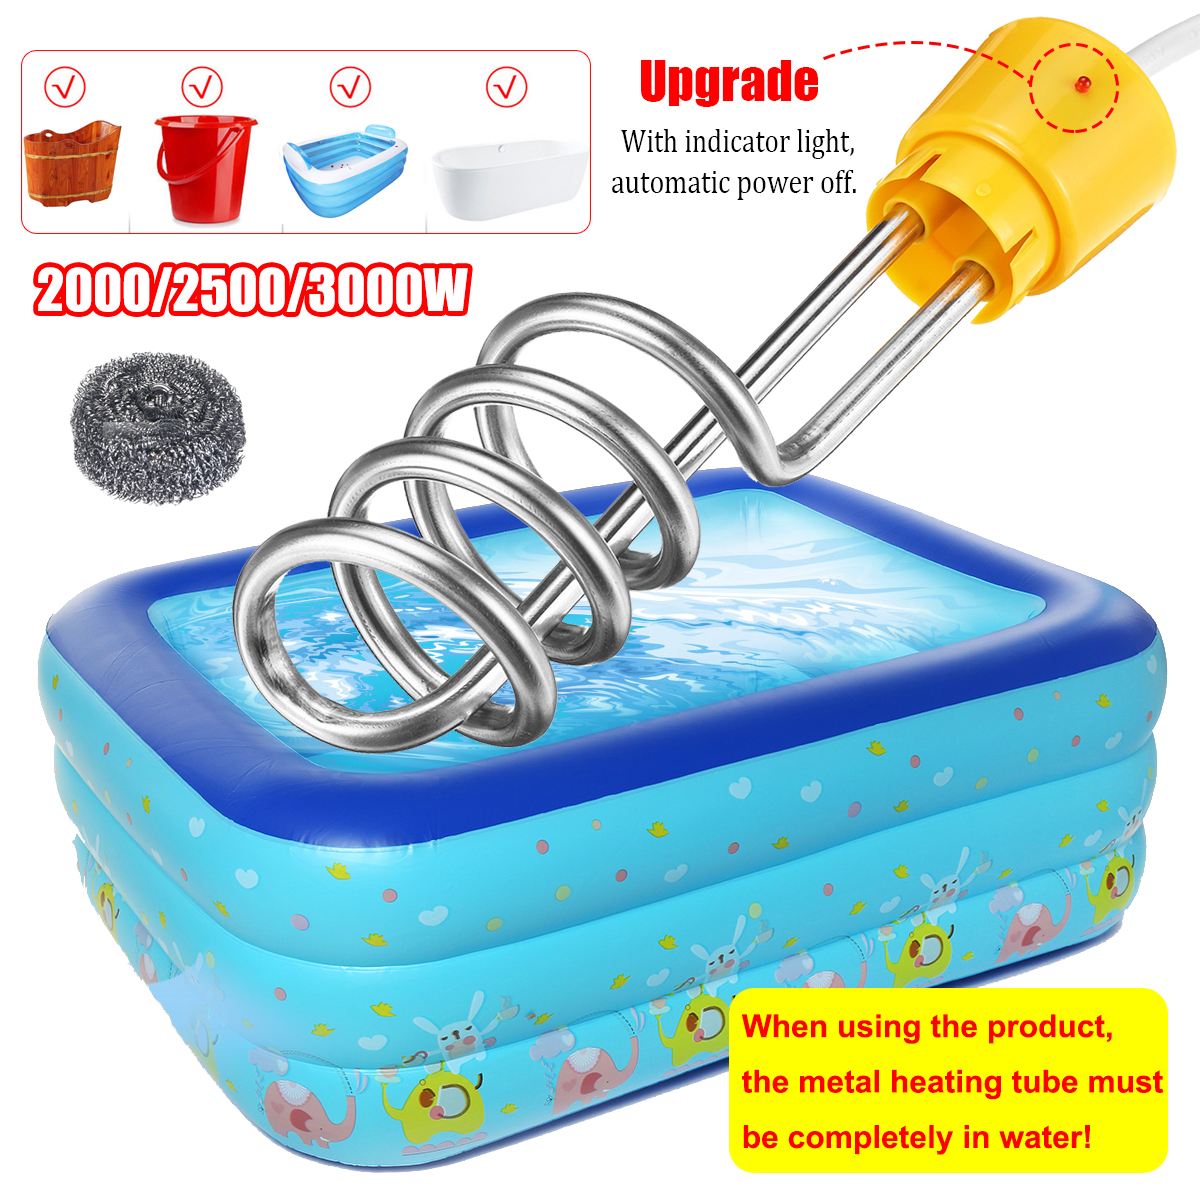 2000W2500W3000W-Suspension-Immersion-Water-Heater-For-Inflatable-Bathtub-1709079-3